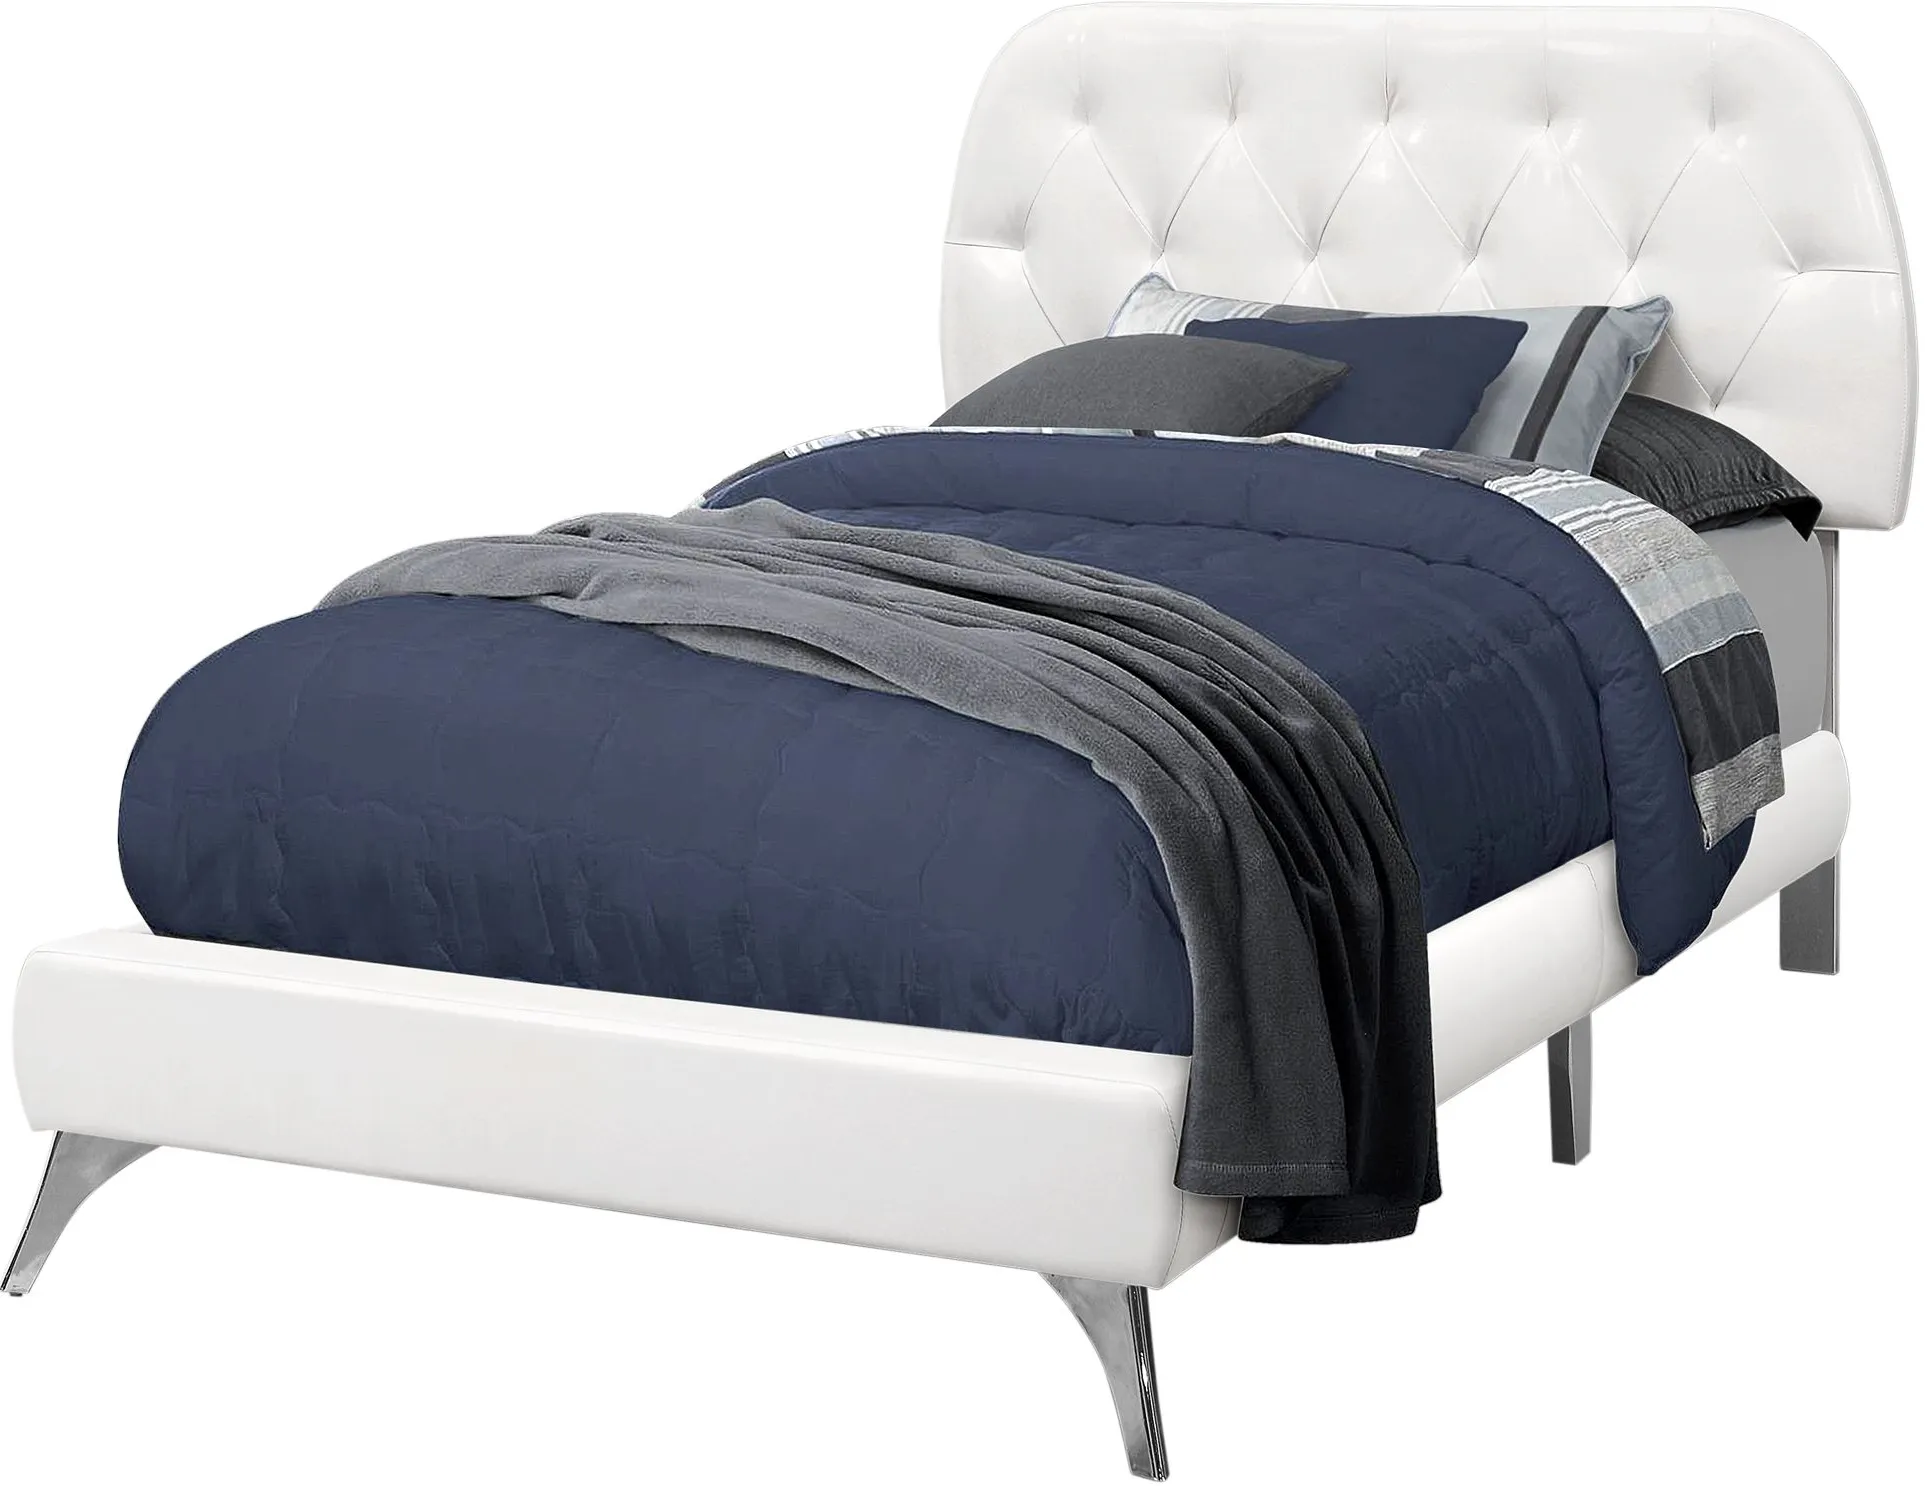 Bed, Twin Size, Platform, Teen, Frame, Upholstered, Pu Leather Look, Wood Legs, White, Chrome, Contemporary, Modern